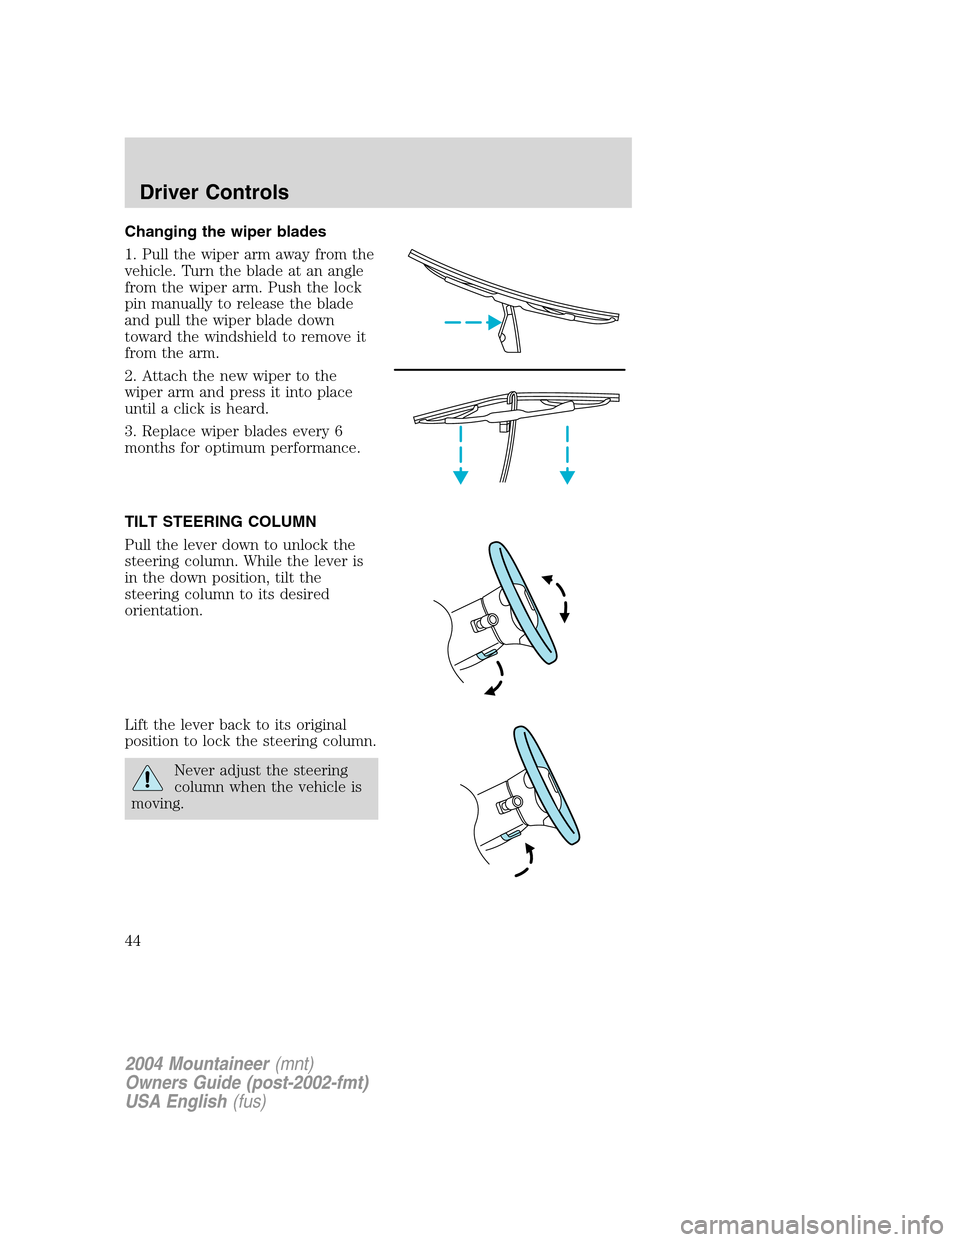 Mercury Mountaineer 2004  s Service Manual Changing the wiper blades
1. Pull the wiper arm away from the
vehicle. Turn the blade at an angle
from the wiper arm. Push the lock
pin manually to release the blade
and pull the wiper blade down
towa